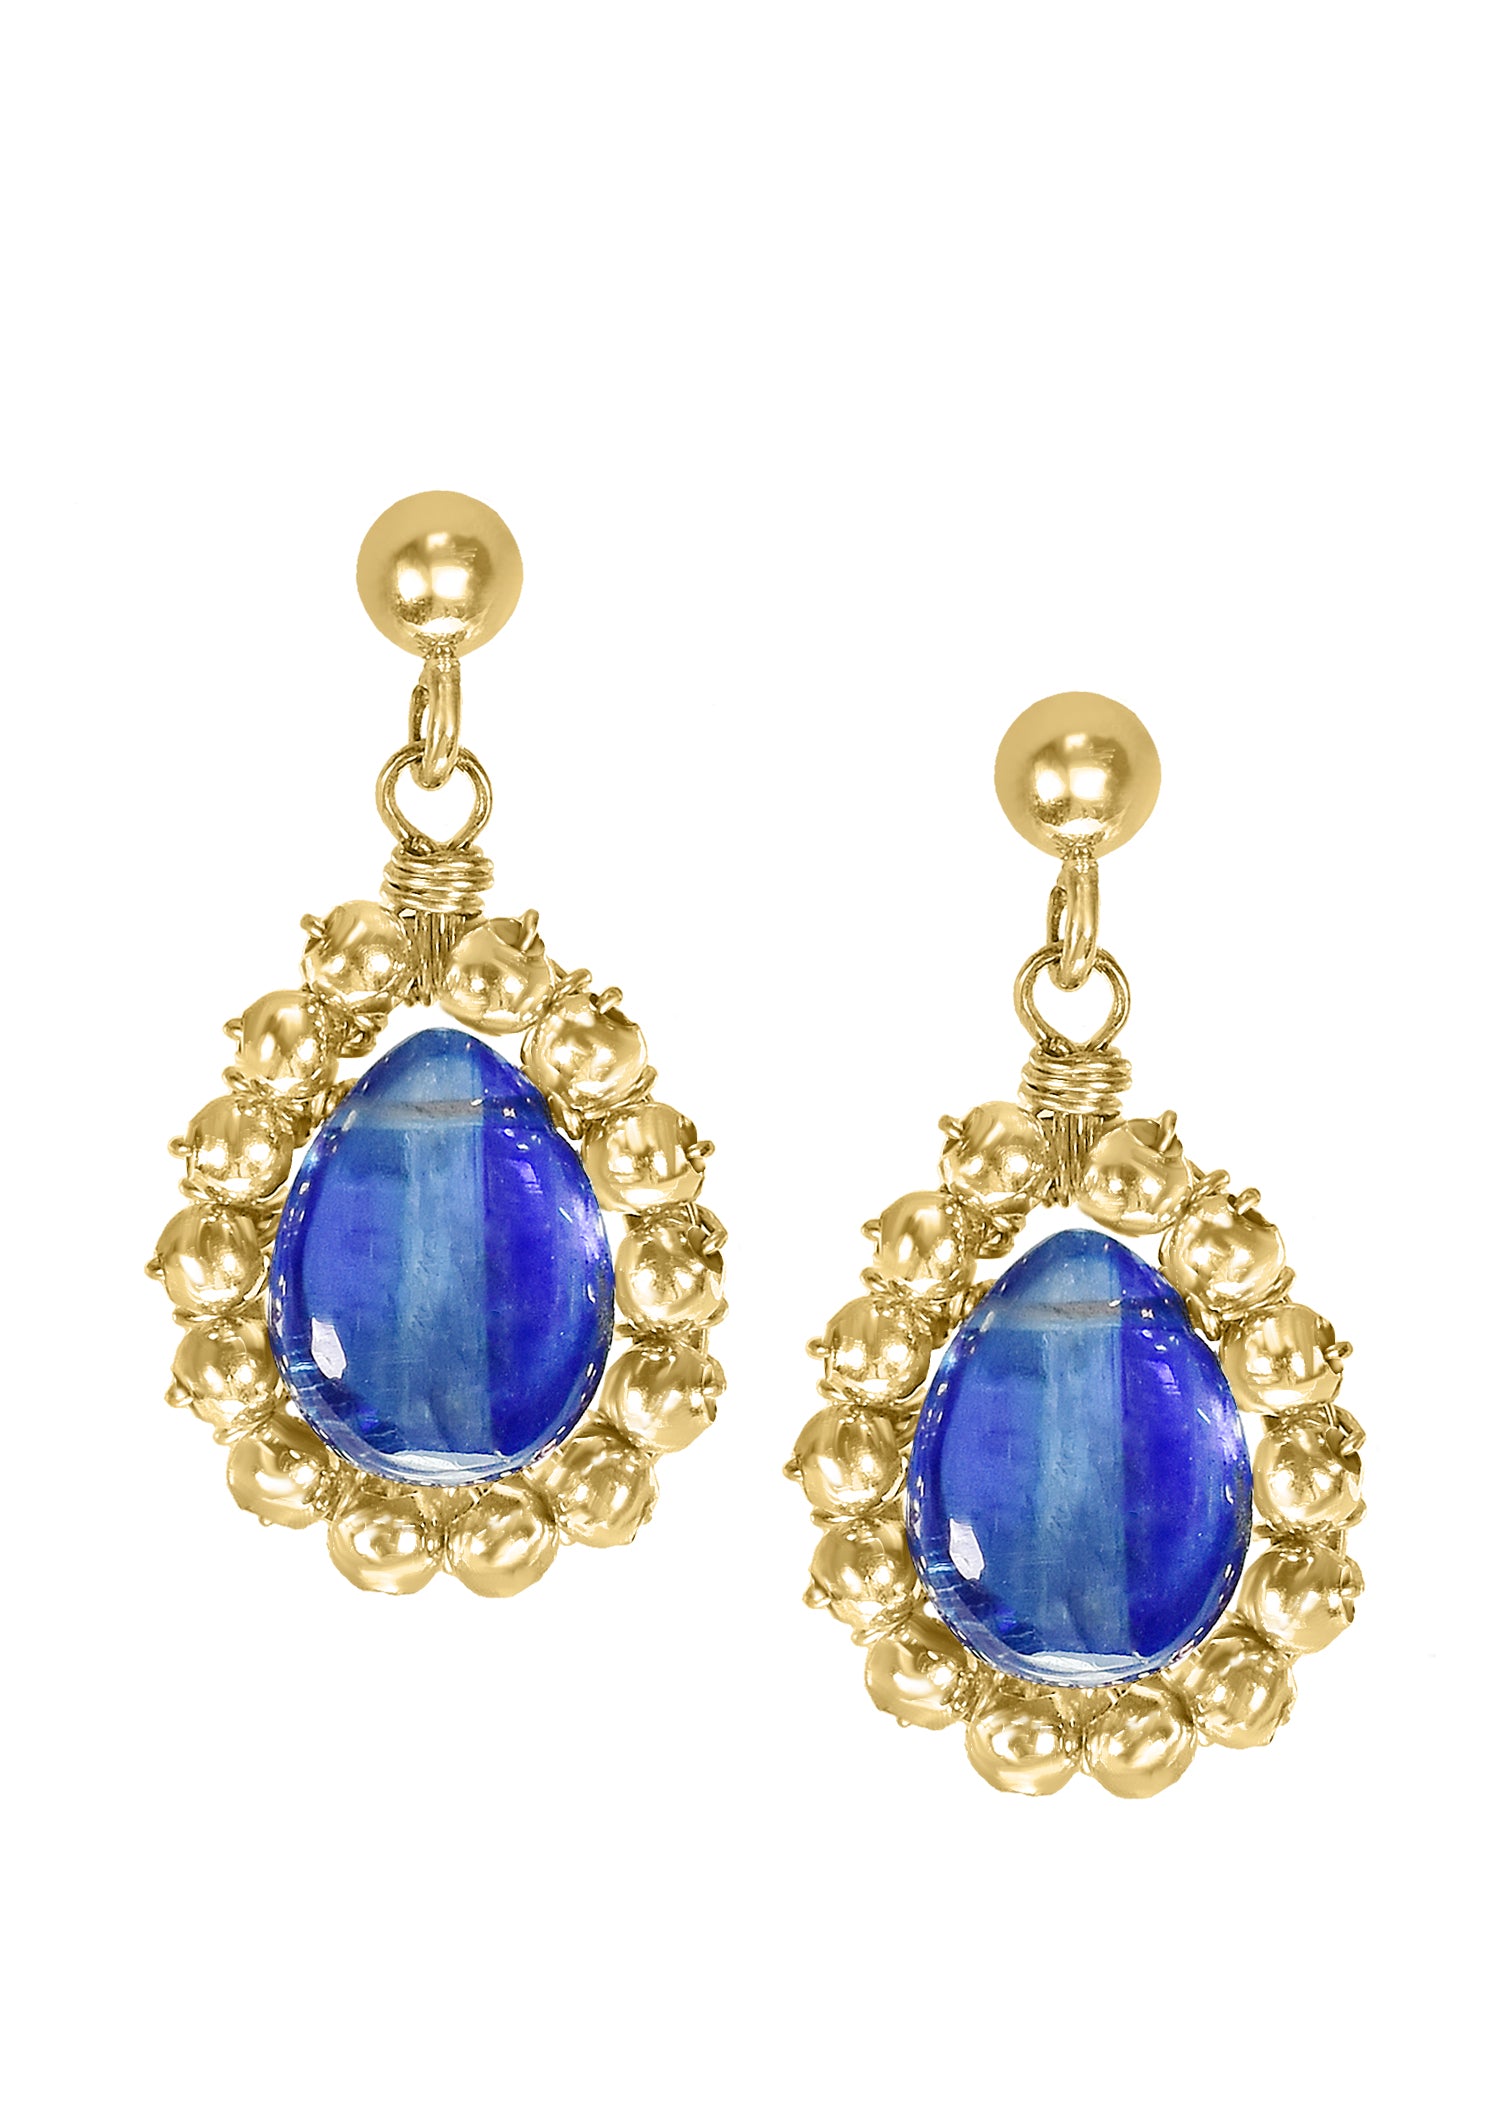 Kyanite 14k gold fill Earrings measure 5/8" in length (including the posts) and 3/8" in width at the widest point Handmade in our Los Angeles studio